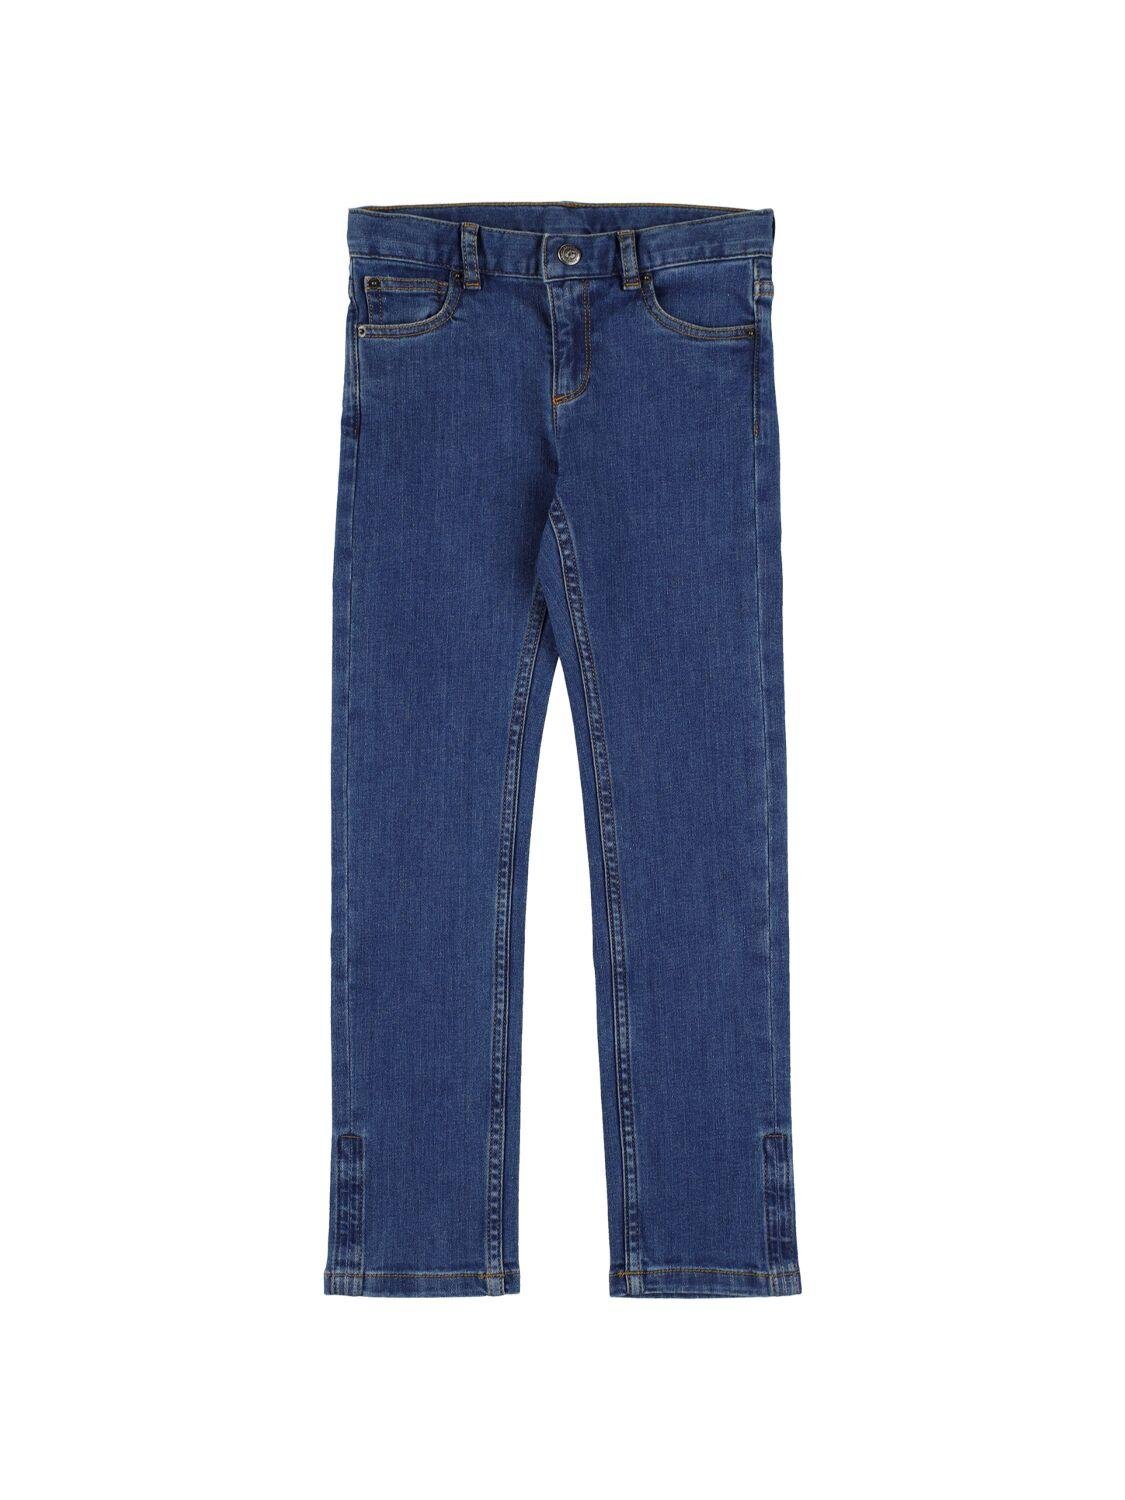 Stretch Cotton Jeans by BONPOINT